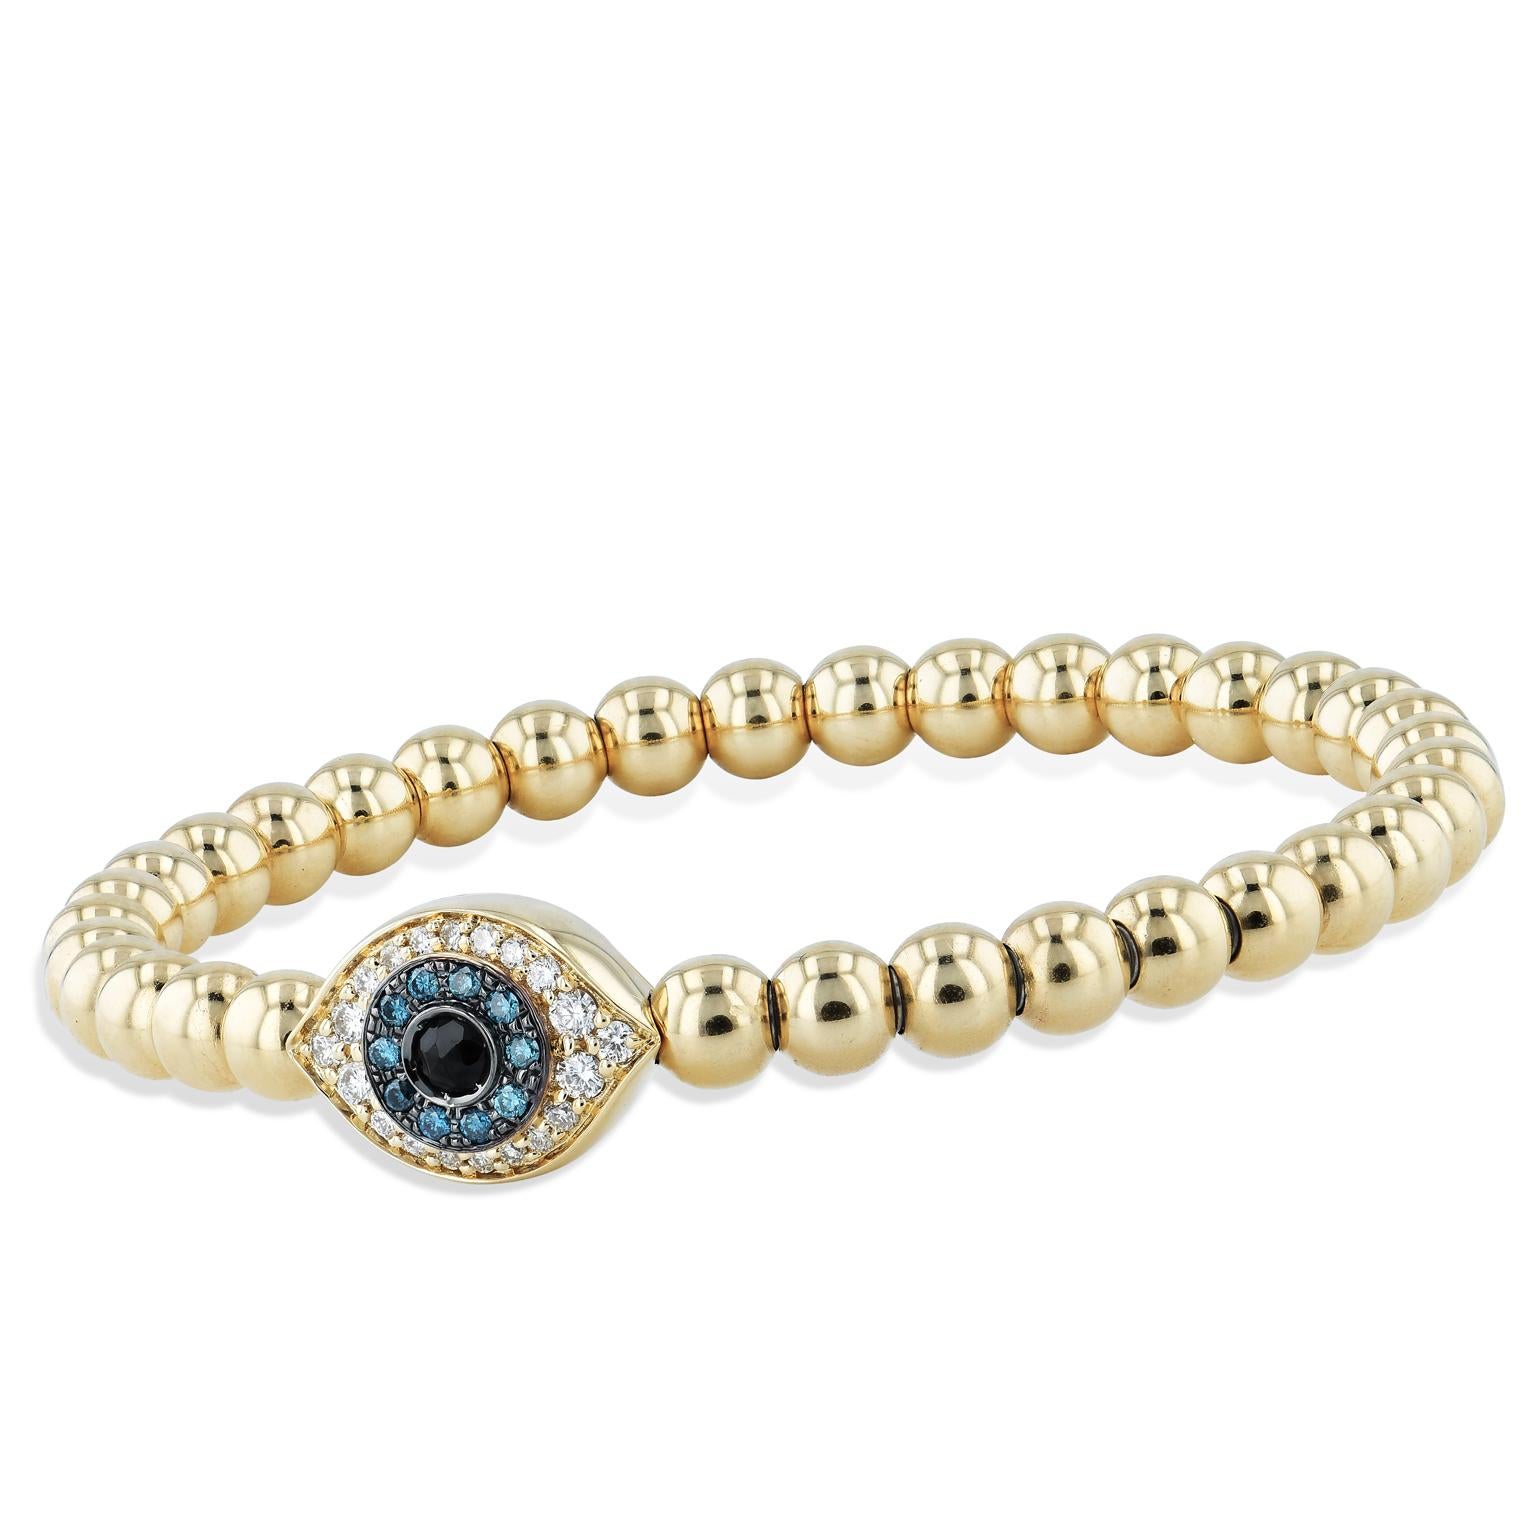 Five millimeter 14 karat yellow gold beads all strung together in a bracelet, this Evil Eye piece will watch over you with the help of 0.25 carat pave-set white diamonds, 0.10 carat blue diamonds, all surrounding  a 0.12 carat rose cut black zircon